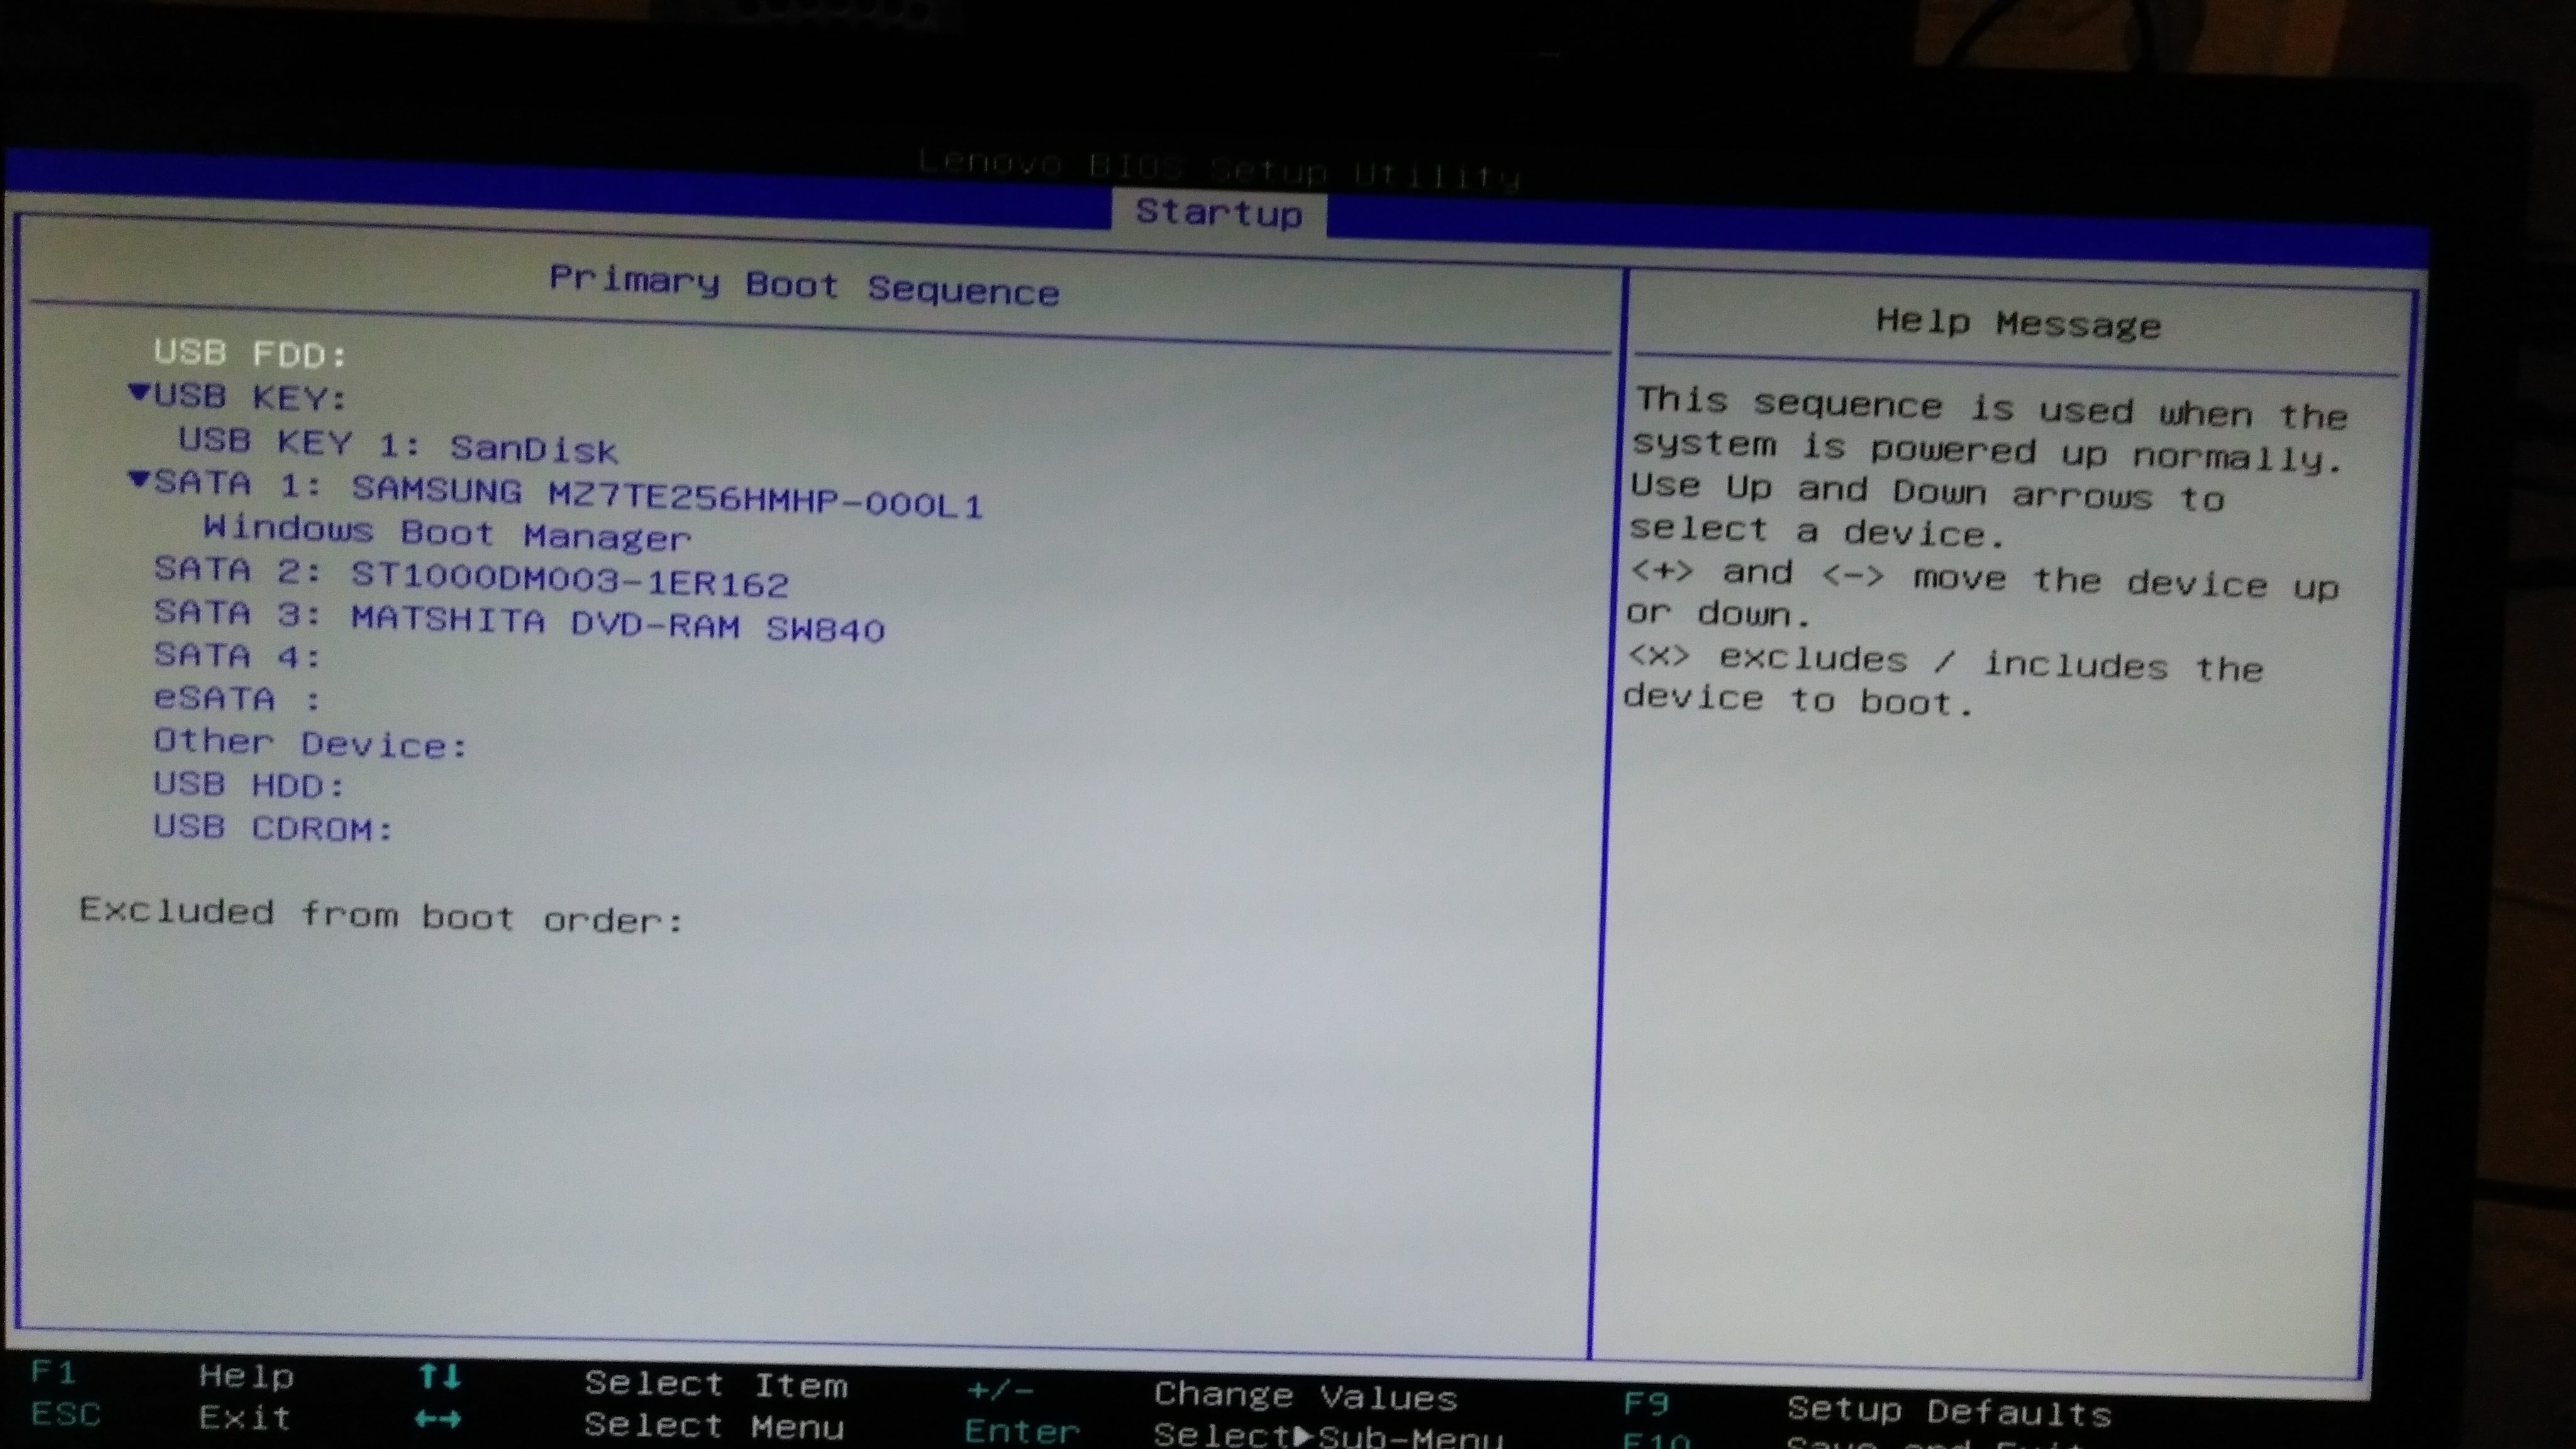 BIOS - startup Primary Boot Sequence